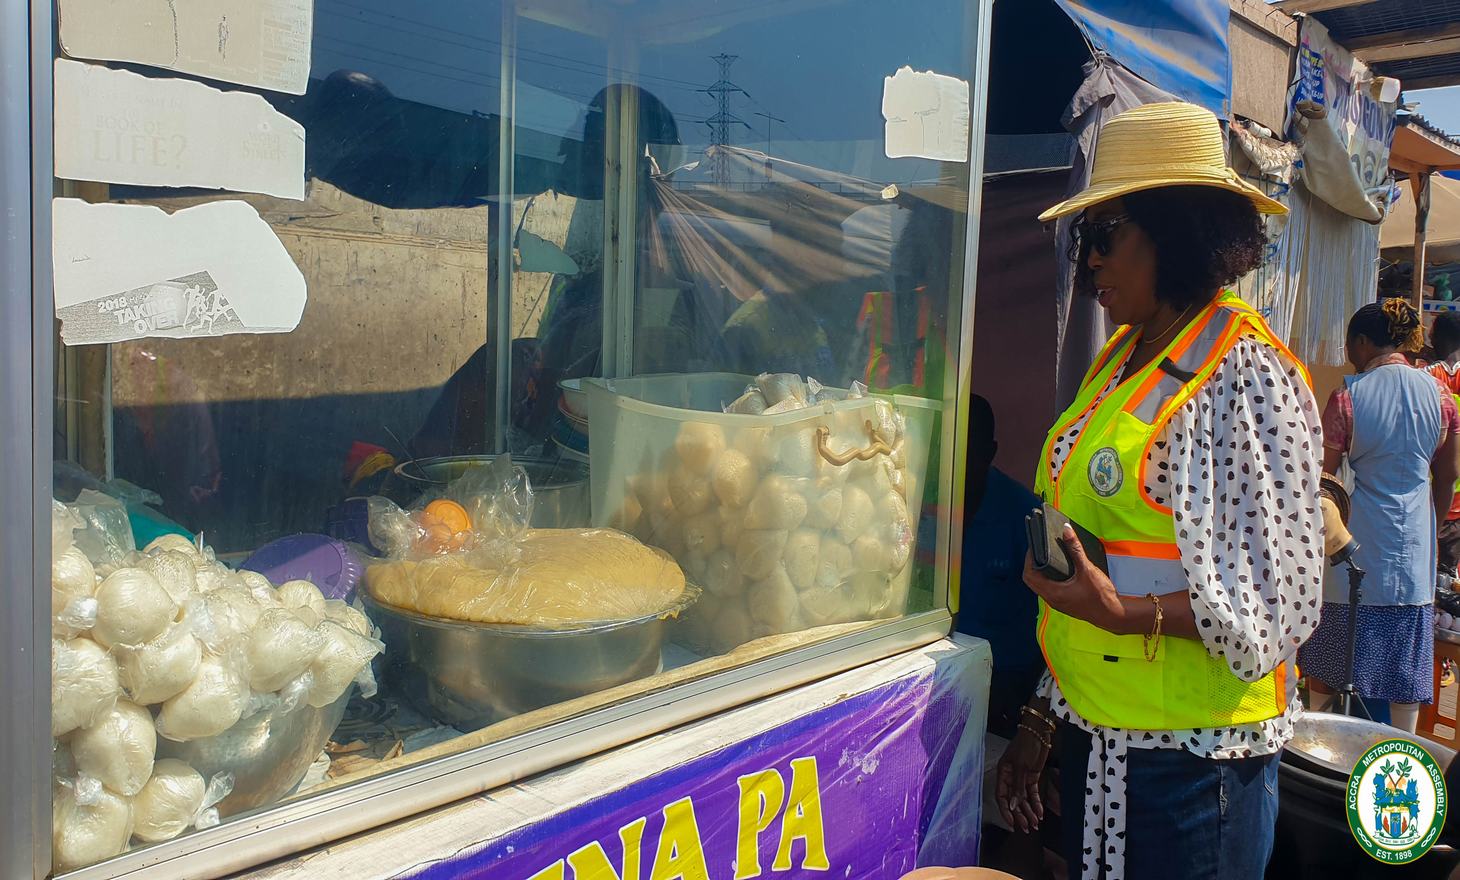 Mayor Of Accra Educates Food Vendors On Food Safety